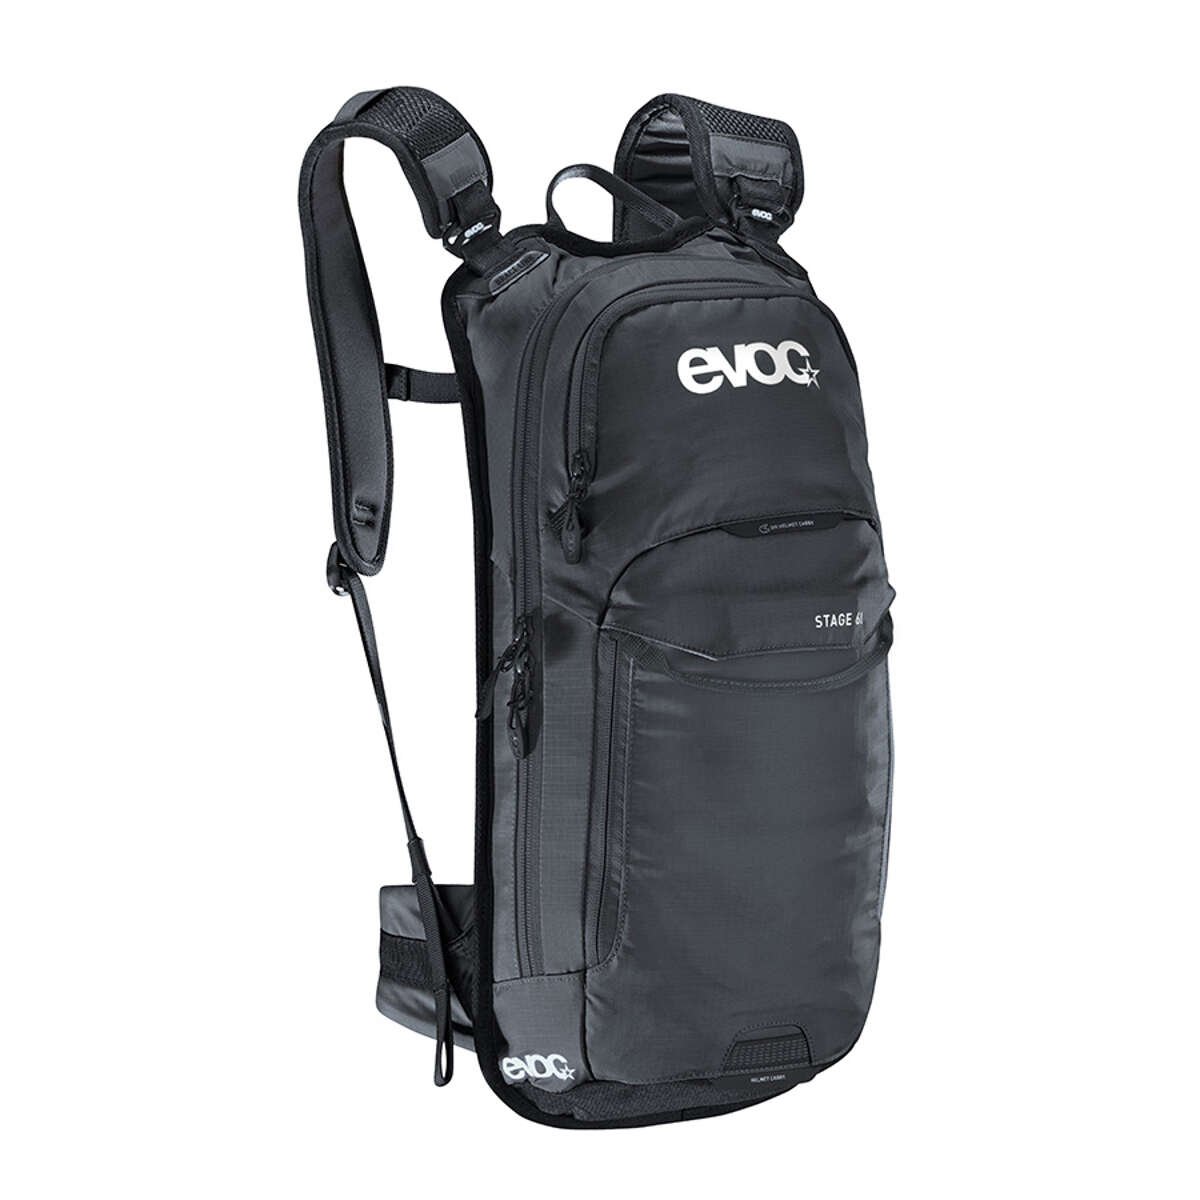 Evoc Backpack with Hydration System Compartment Stage 6L - Black